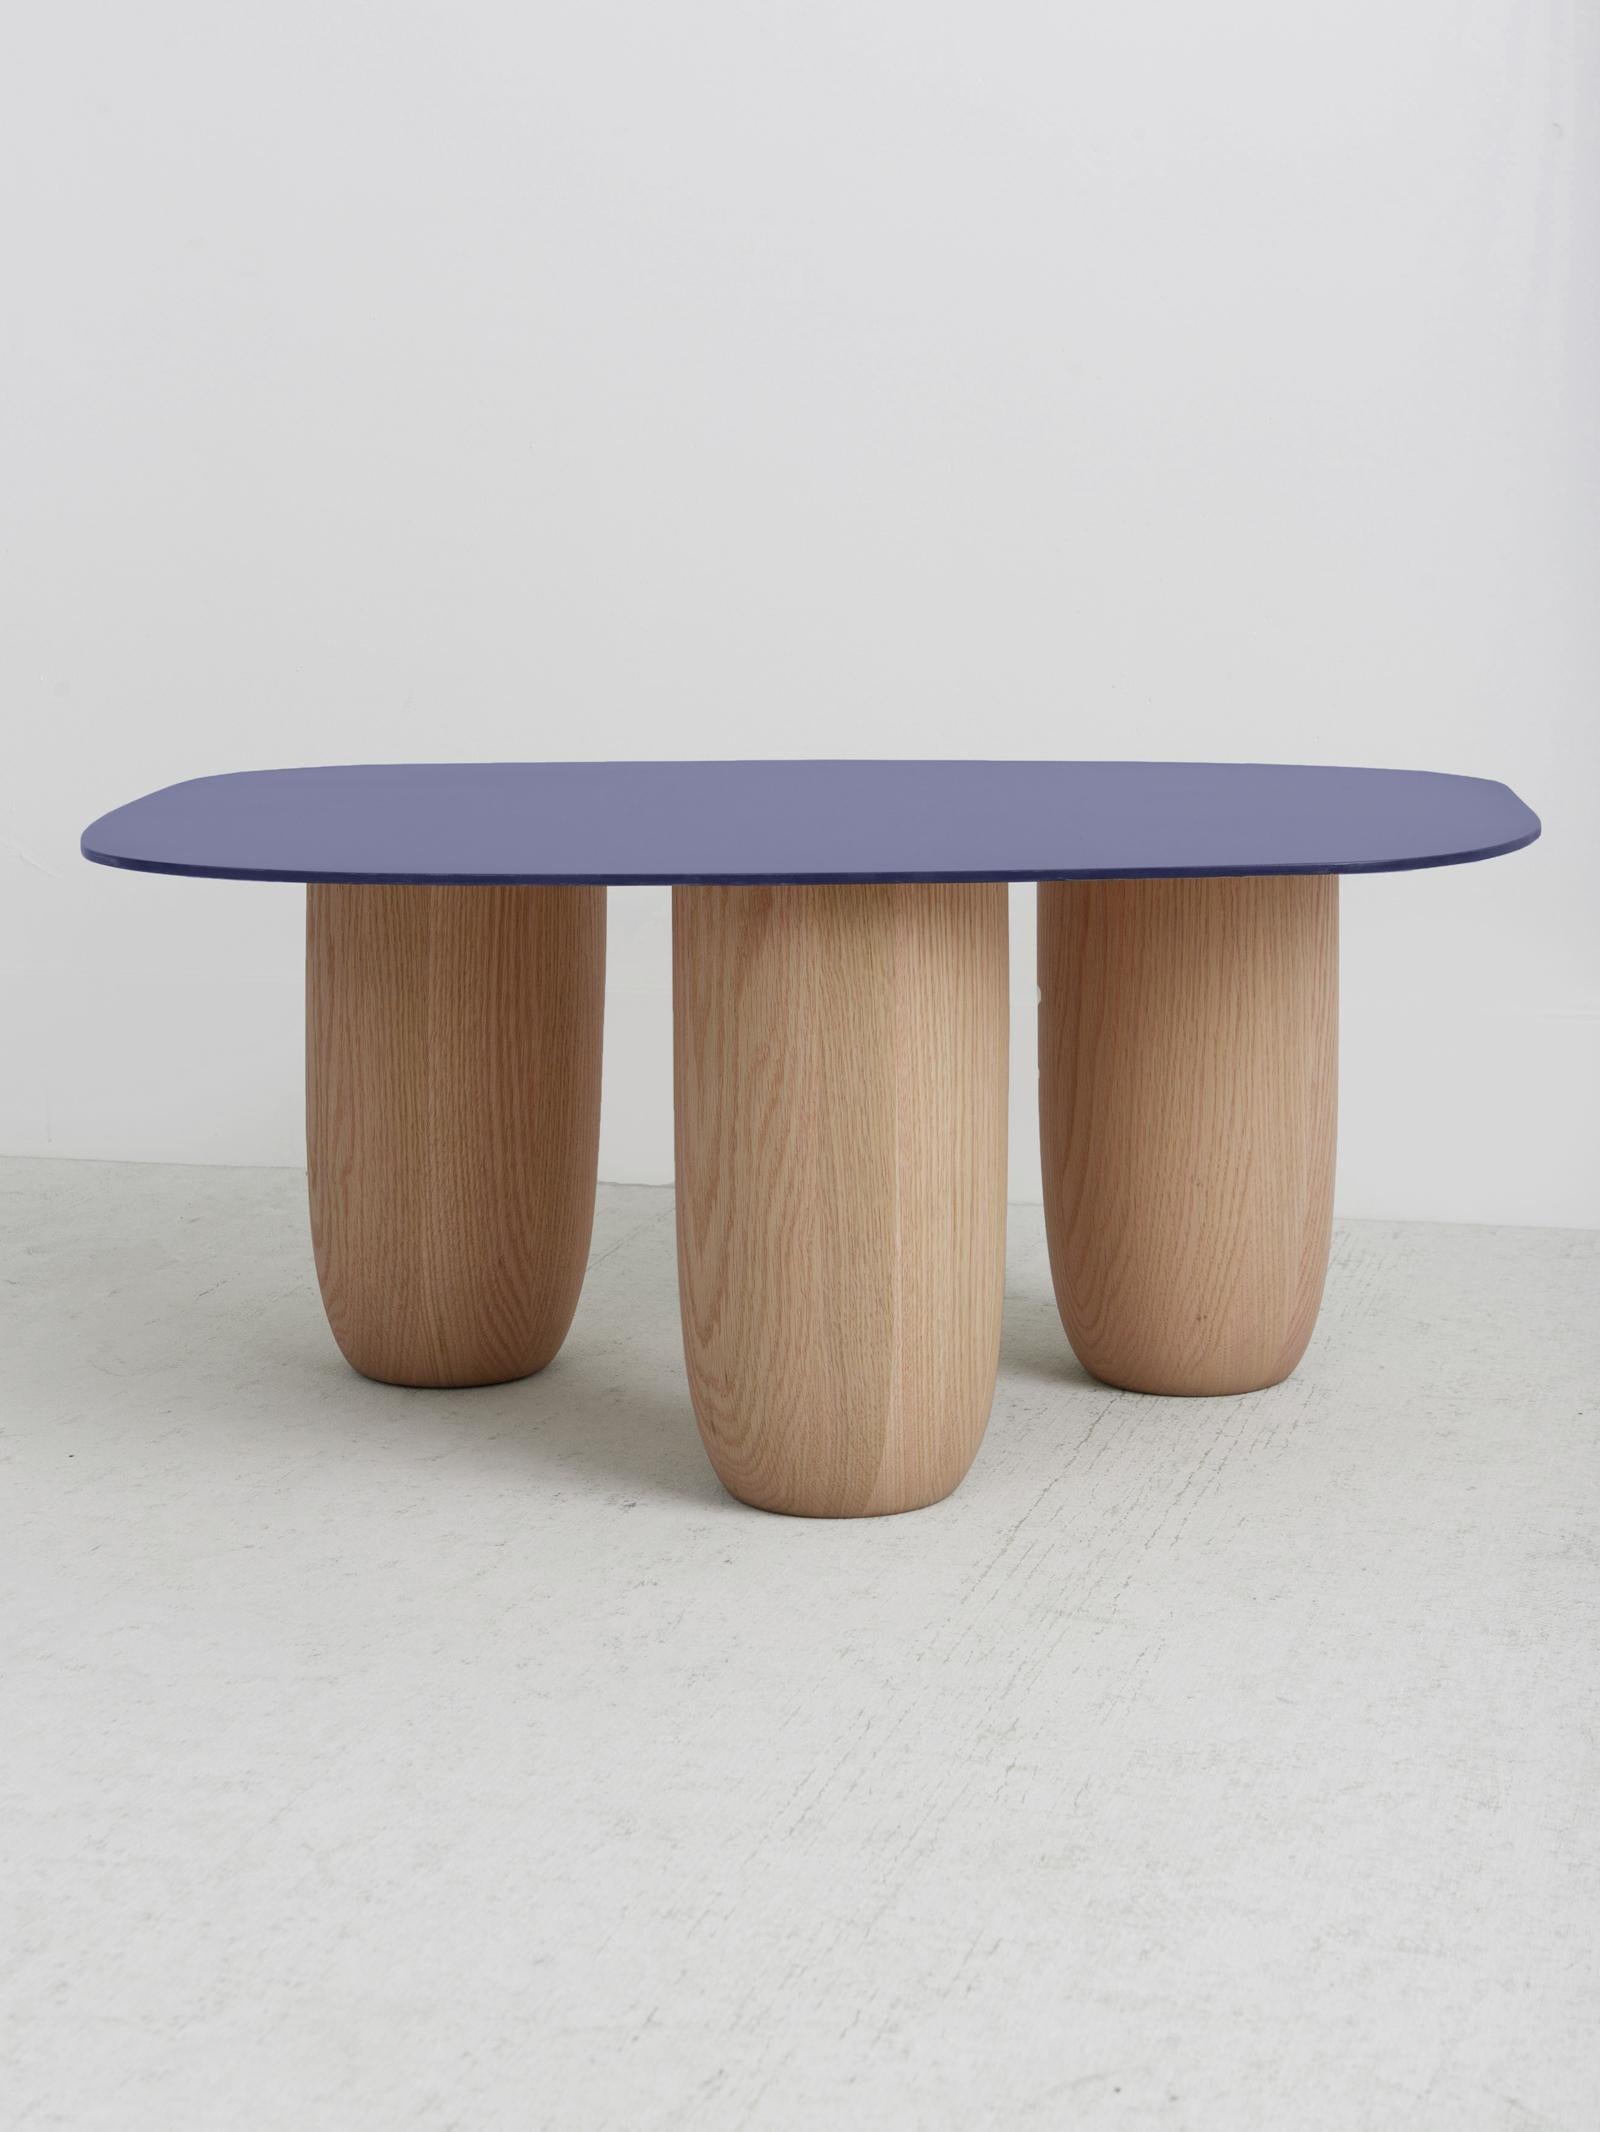 Powder-Coated Contemporary Low Tables Blue Steel Top with Natural Oak Legs by Vivian Carbonell For Sale